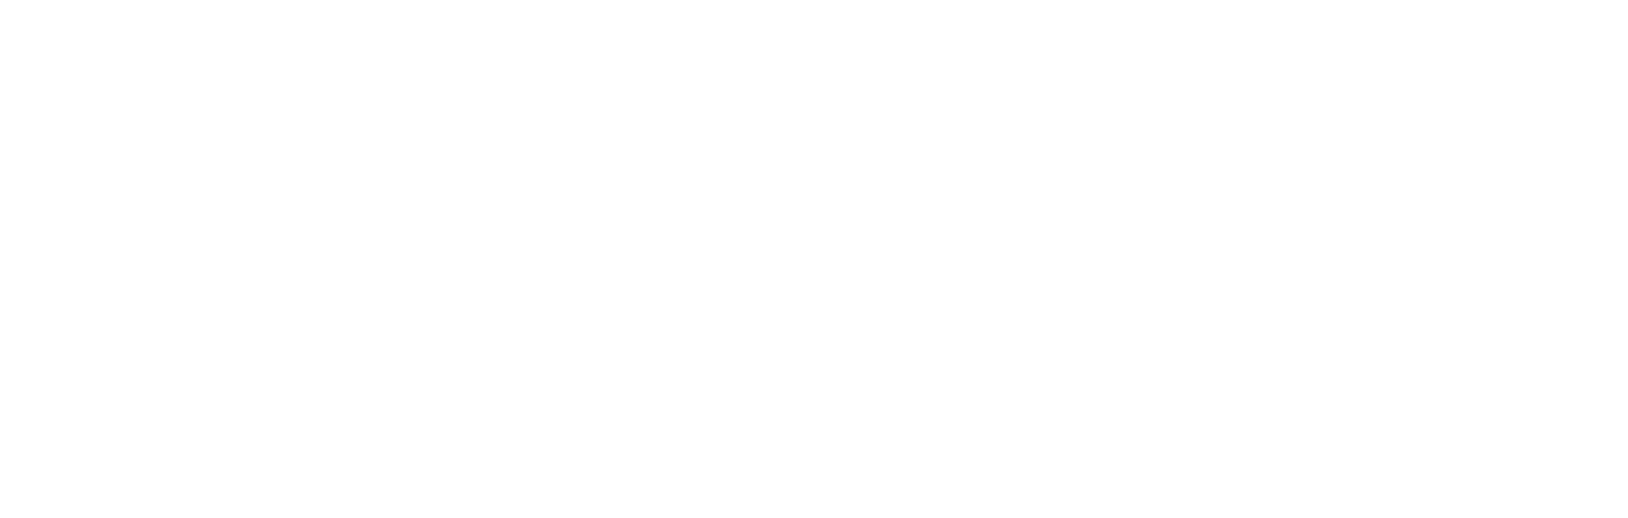 CC_Academy_logo_white.png (updated version)